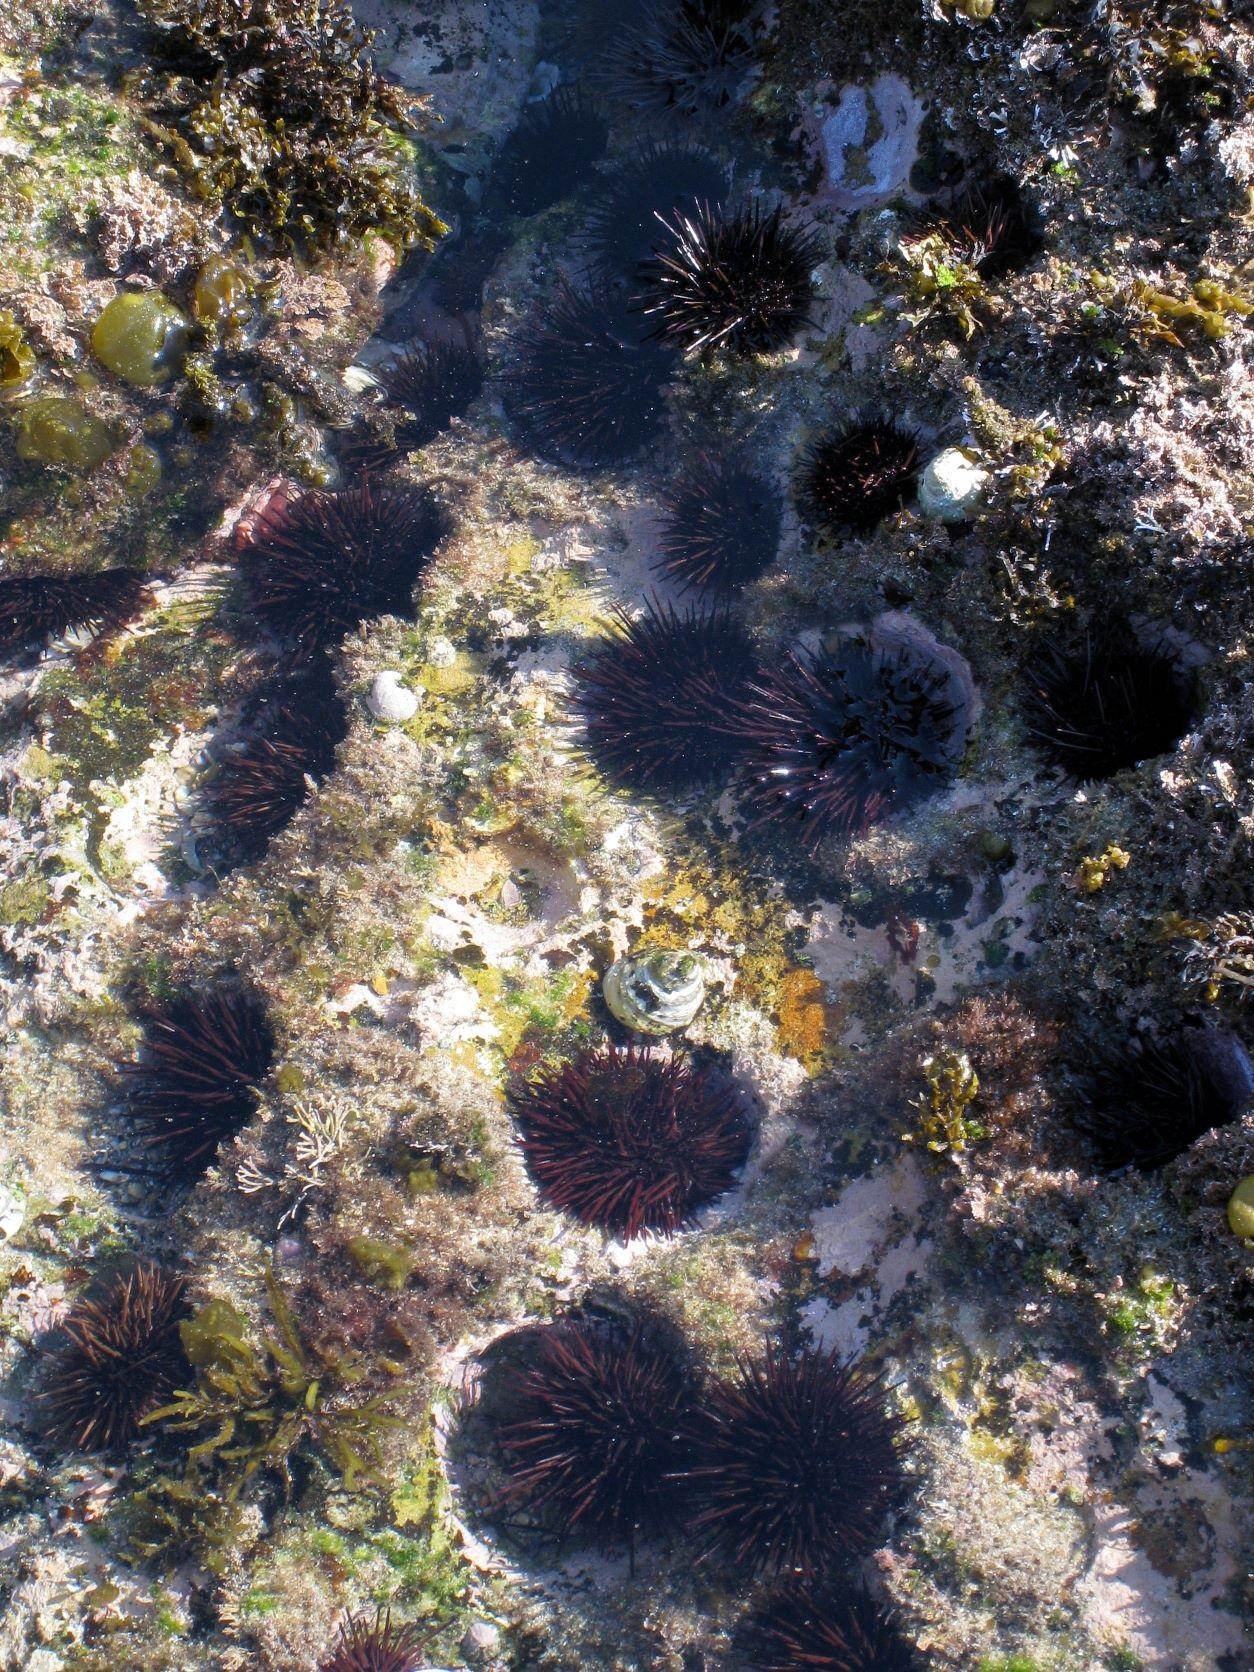 Heliocidaris population in Sydney, Australia. Sea urchins play a key role in maintaining the function of ecosystems, but the fate of future populations is under threat due to increases in the occurrence of marine heatwaves.